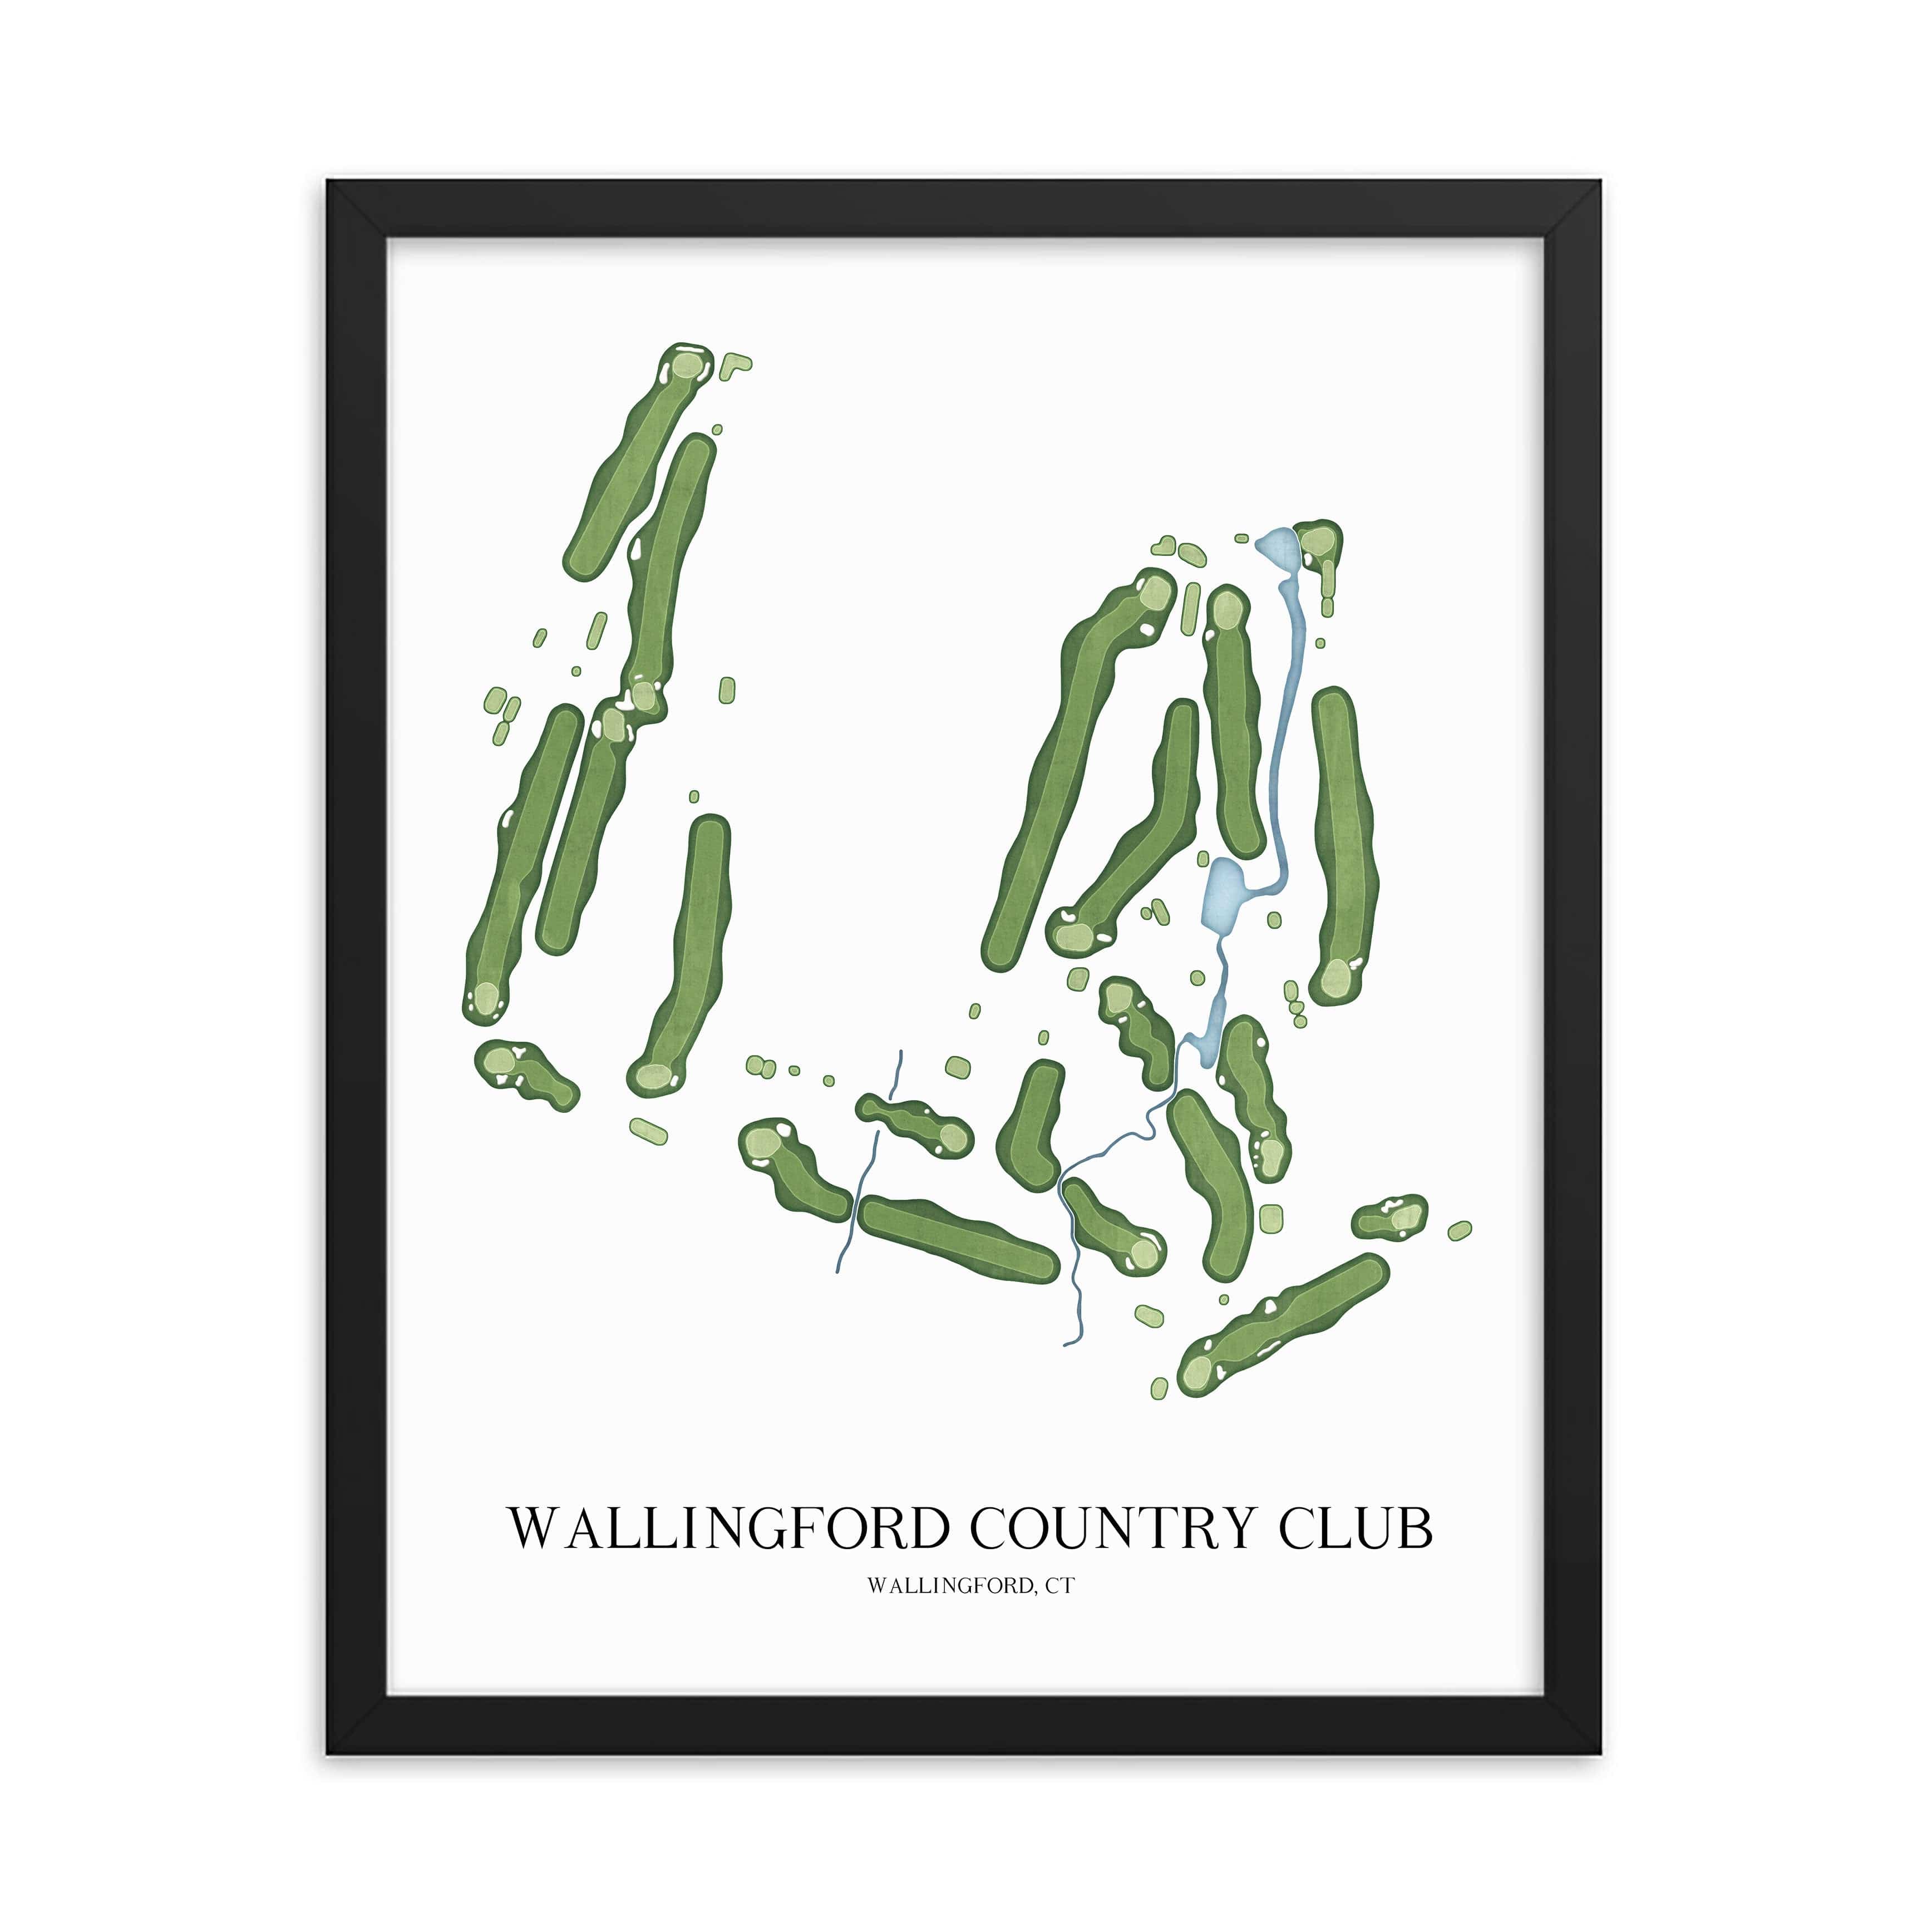 The 19th Hole Golf Shop - Golf Course Prints -  Wallingford Country Club Golf Course Map